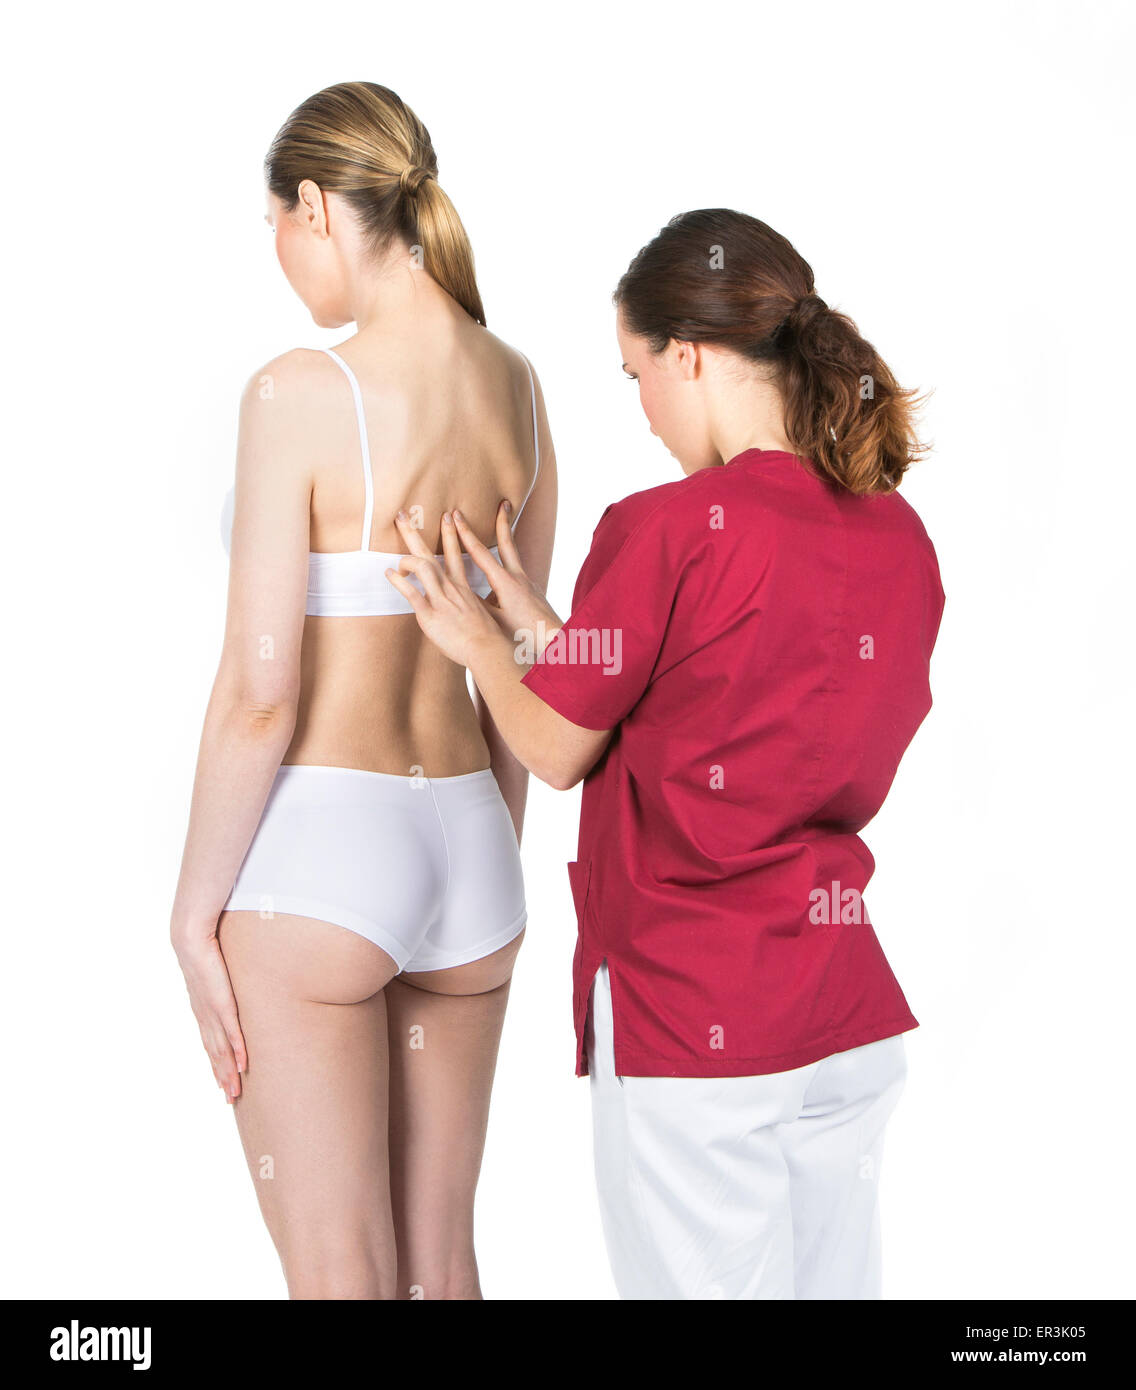 physiotherapist doing a physical examination of a woman Stock Photo